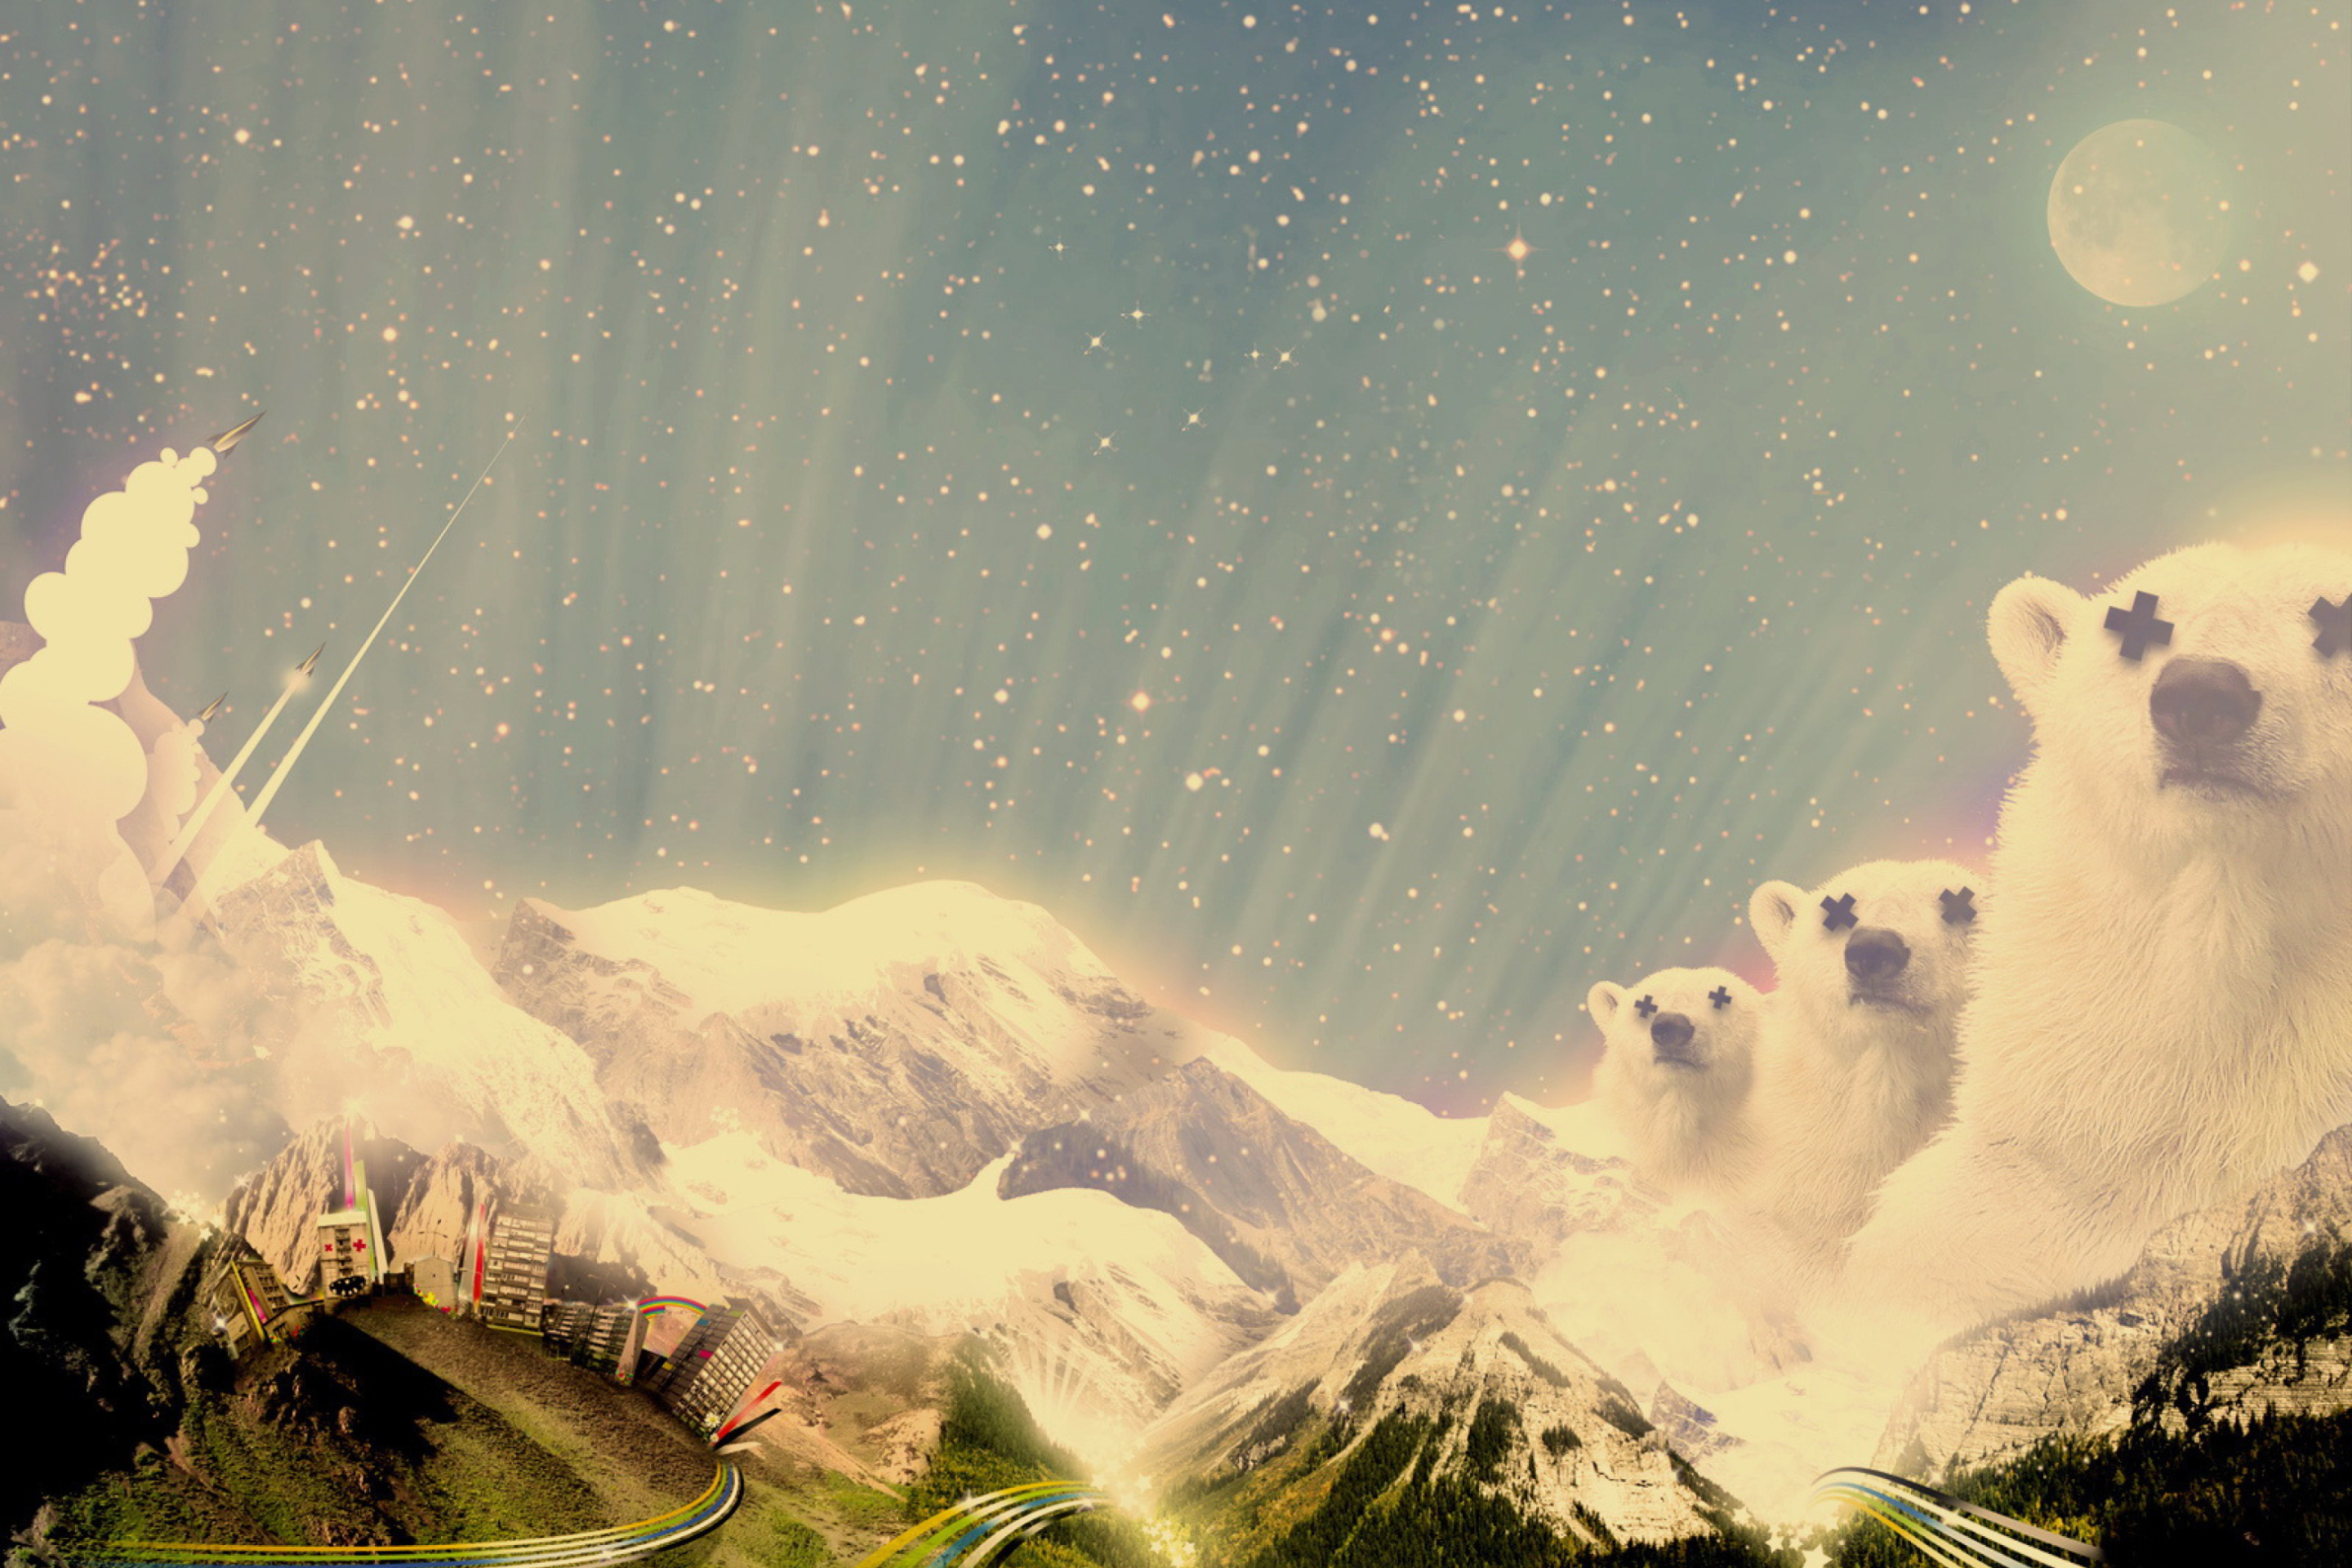 Das Abstract Mountains And Bears Wallpaper 2880x1920